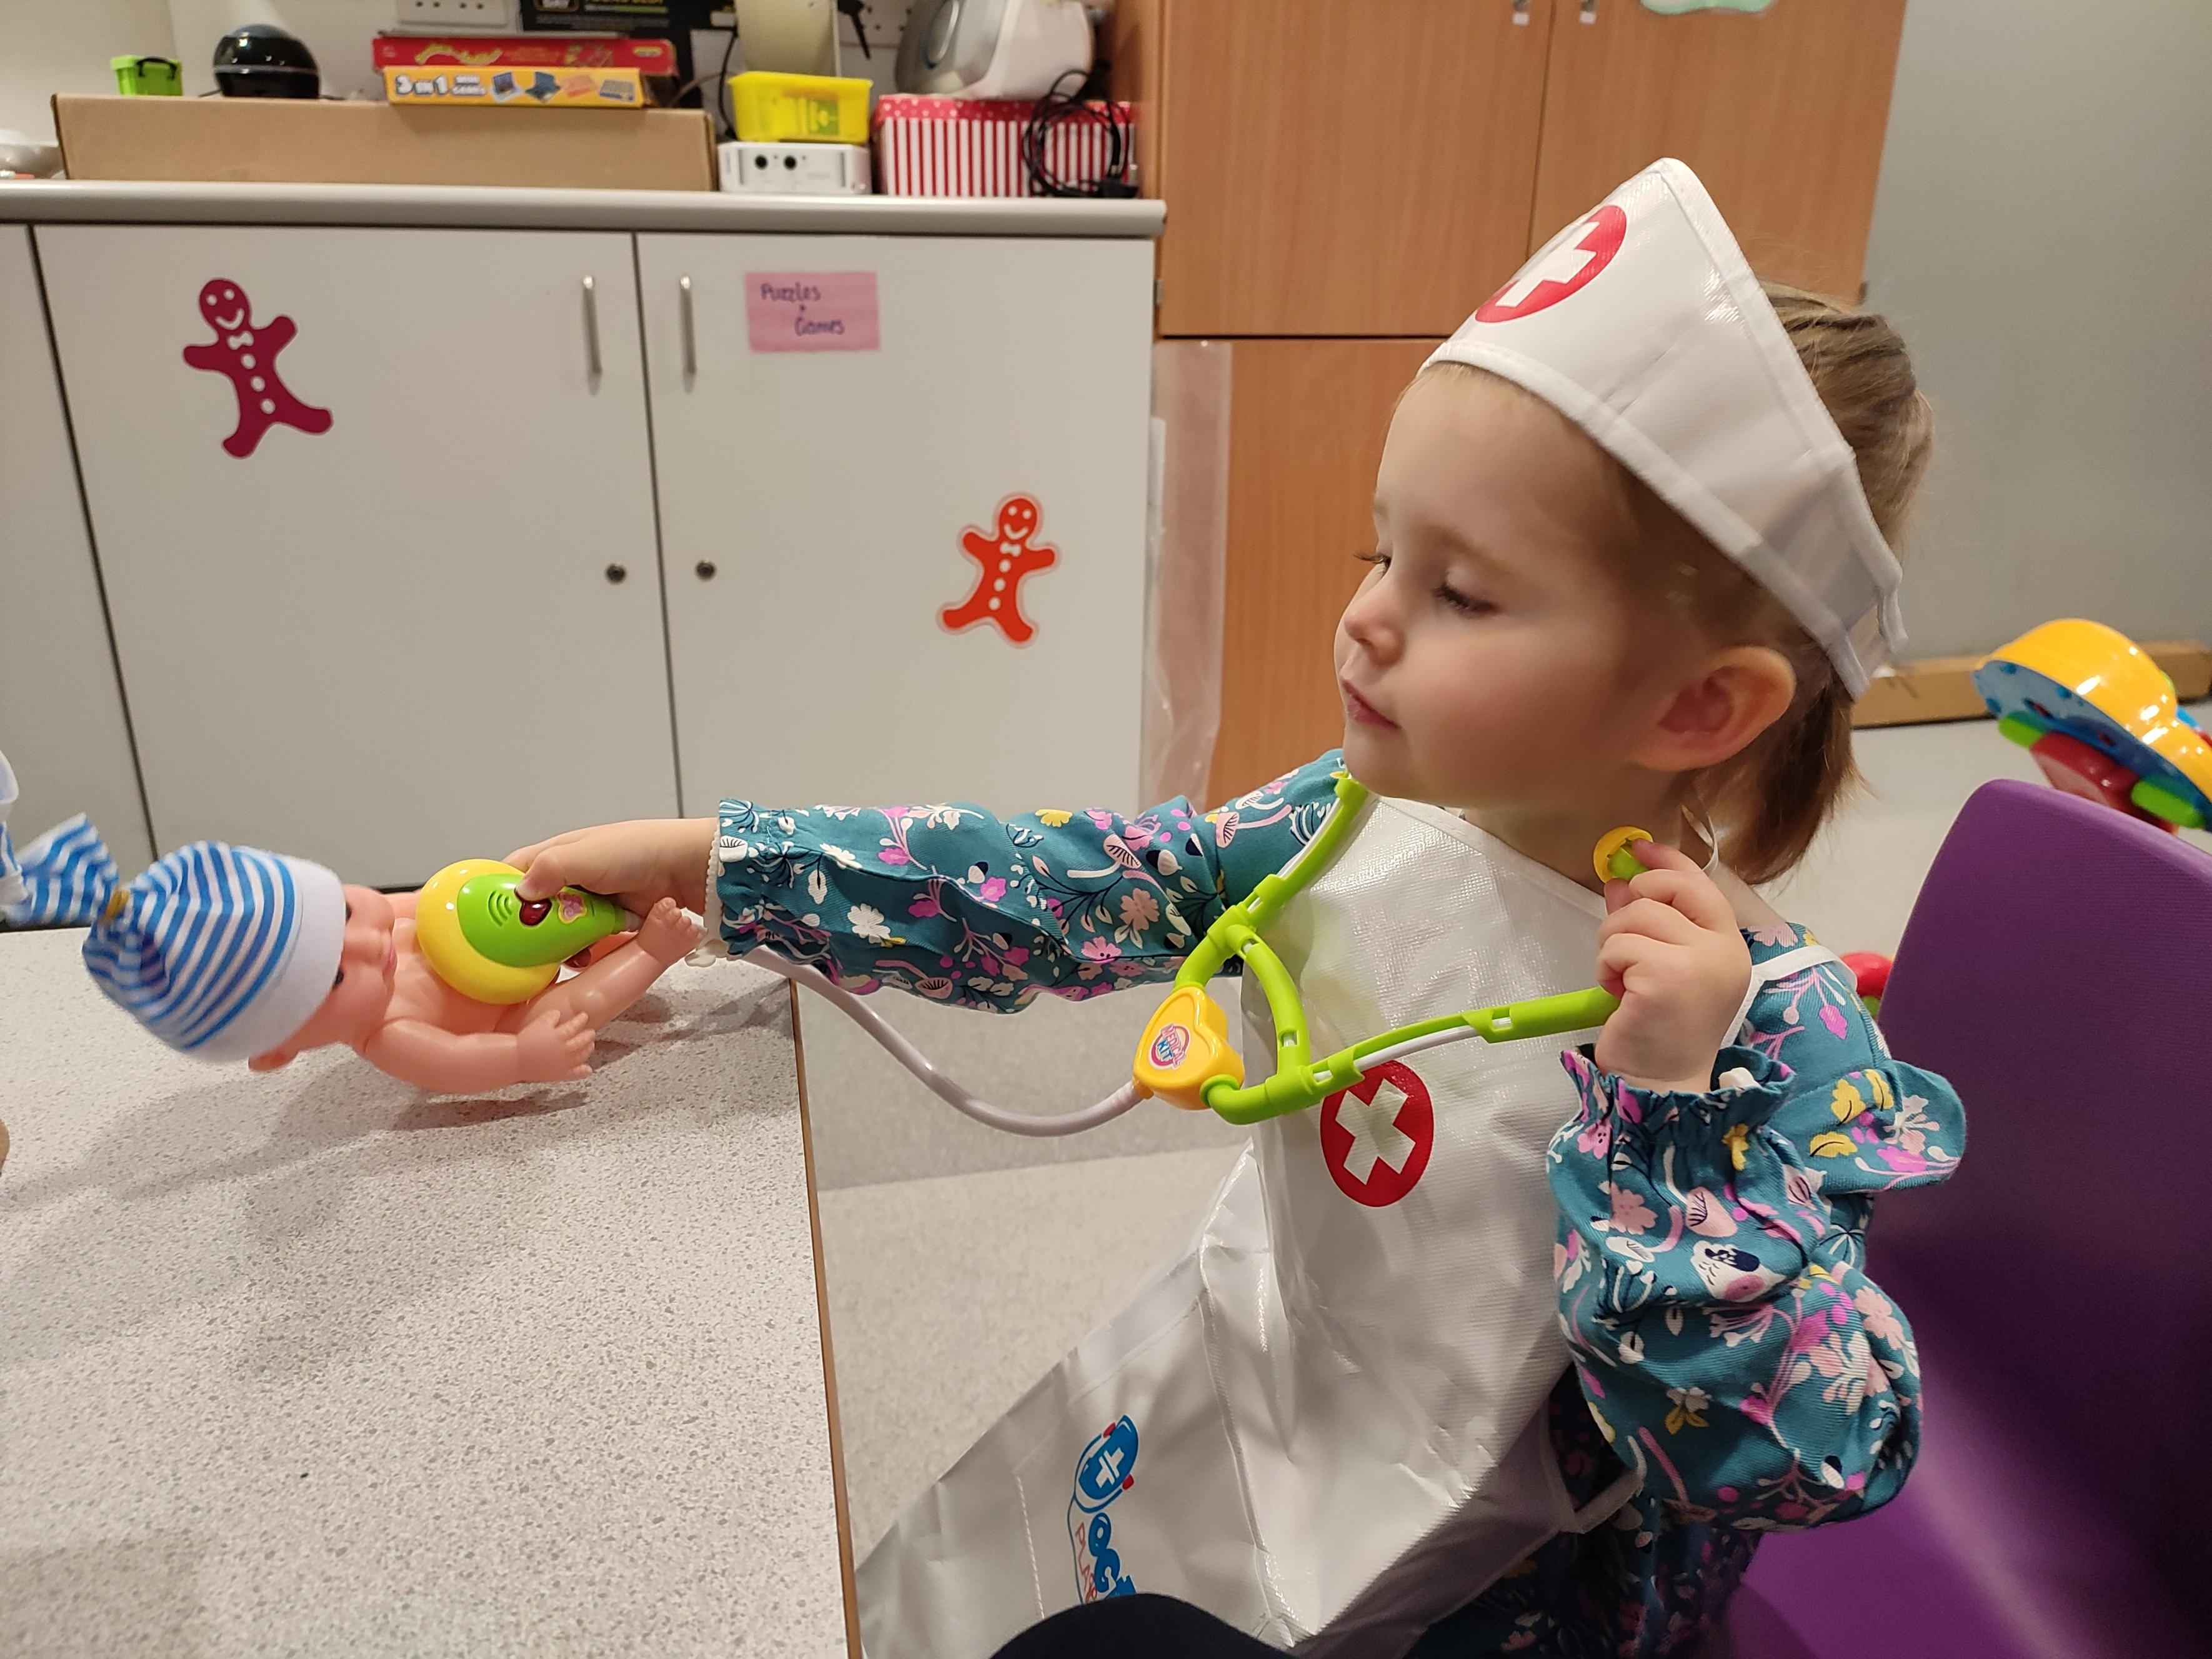 Fiony dressed as a nurse, sat at a table, using a toy stethoscope to listen to heart of a doll